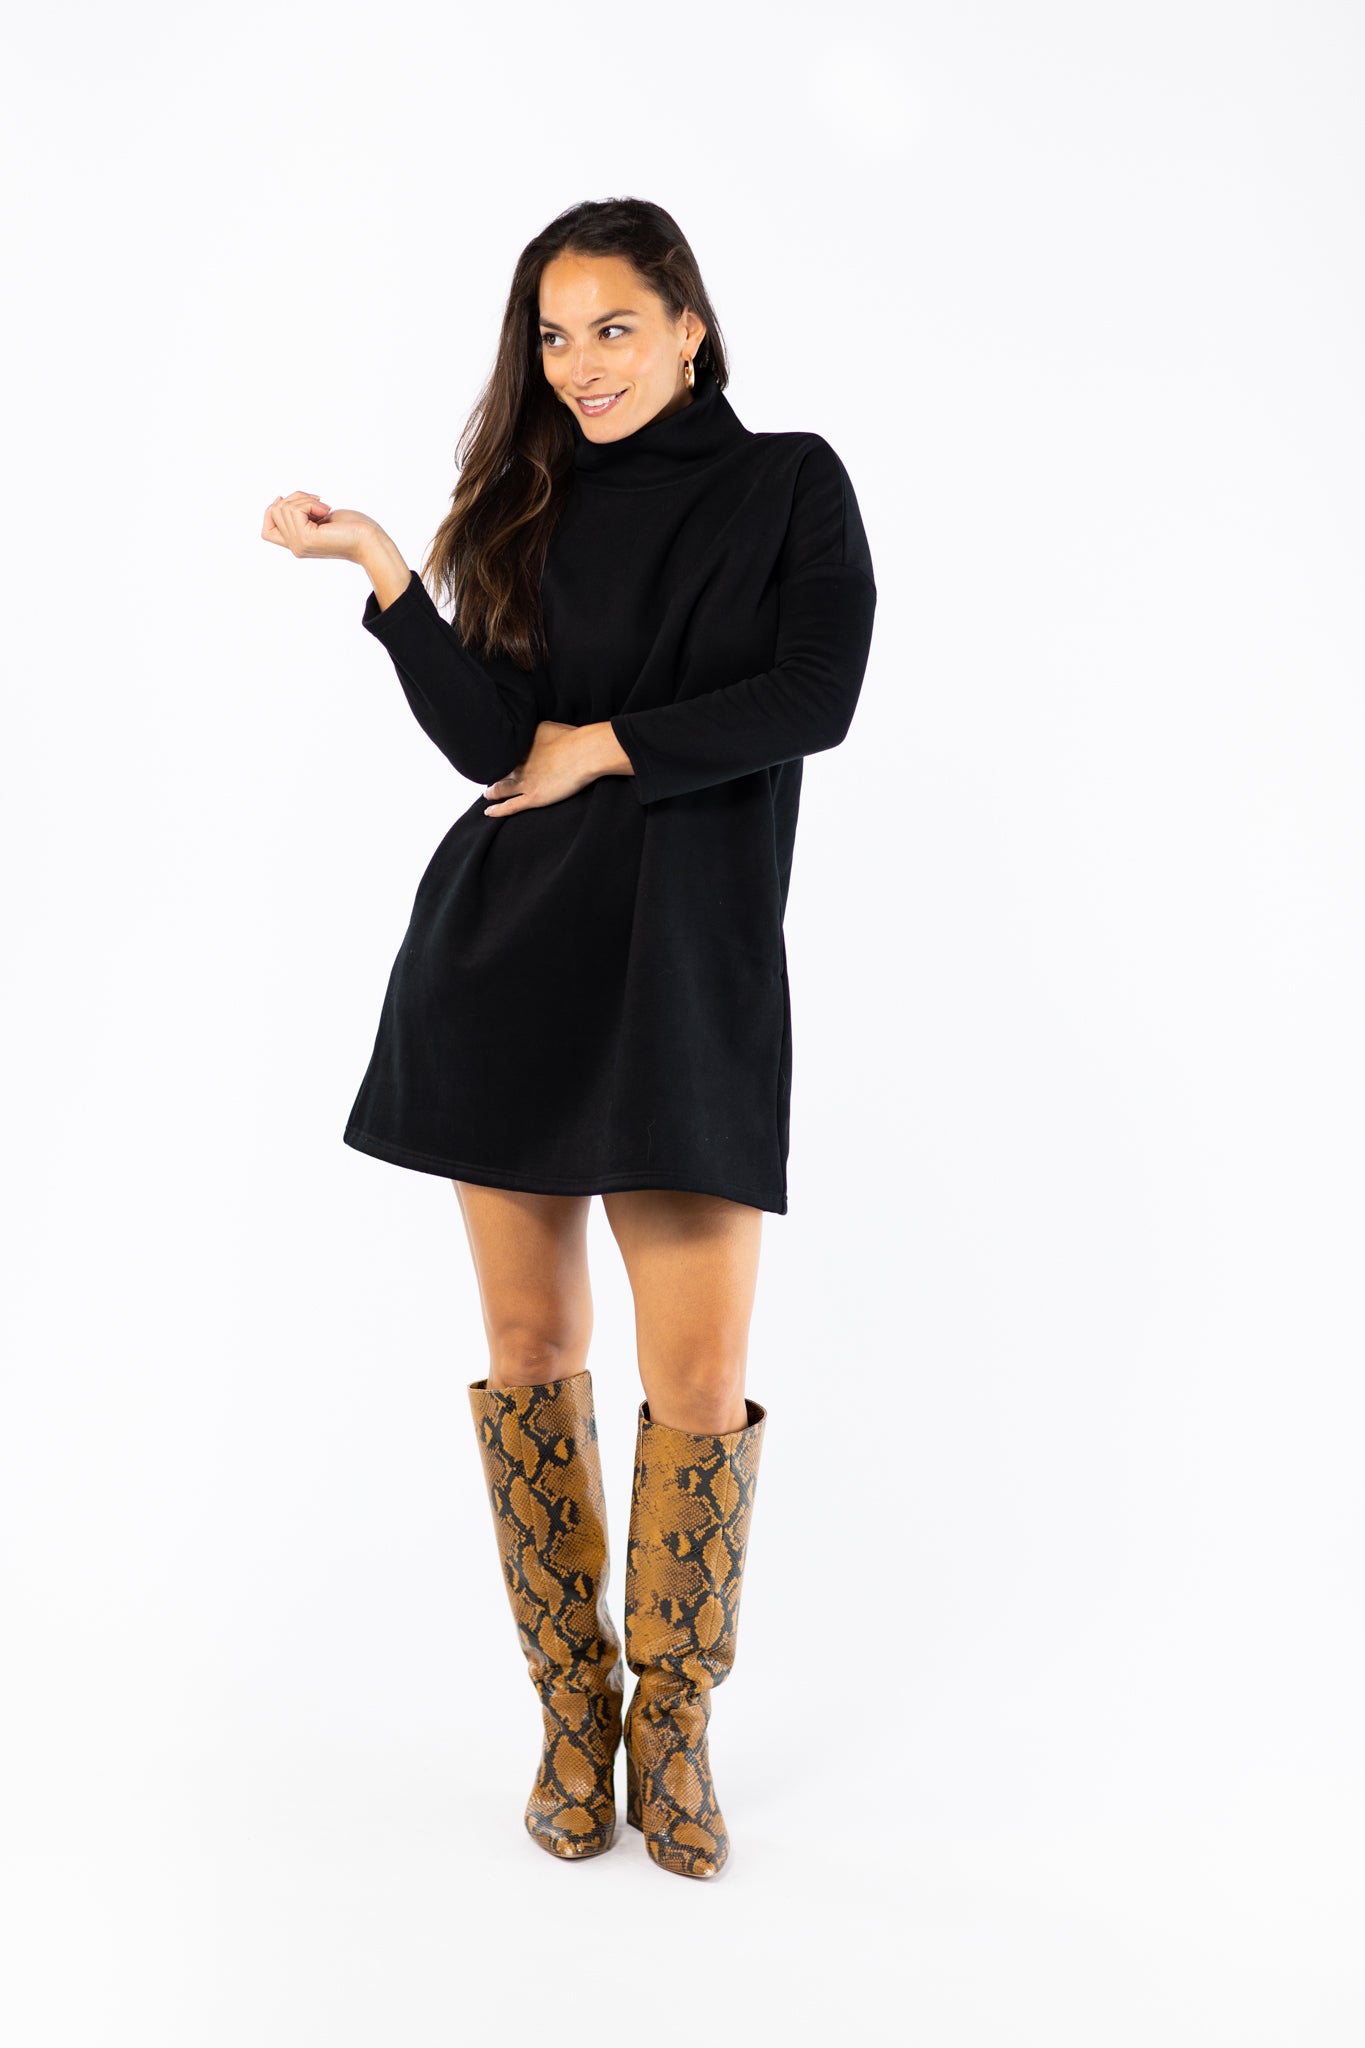 smith-_-quinn-womens-fall-collection-polly-sweatshirt-dress-black-front_2000x